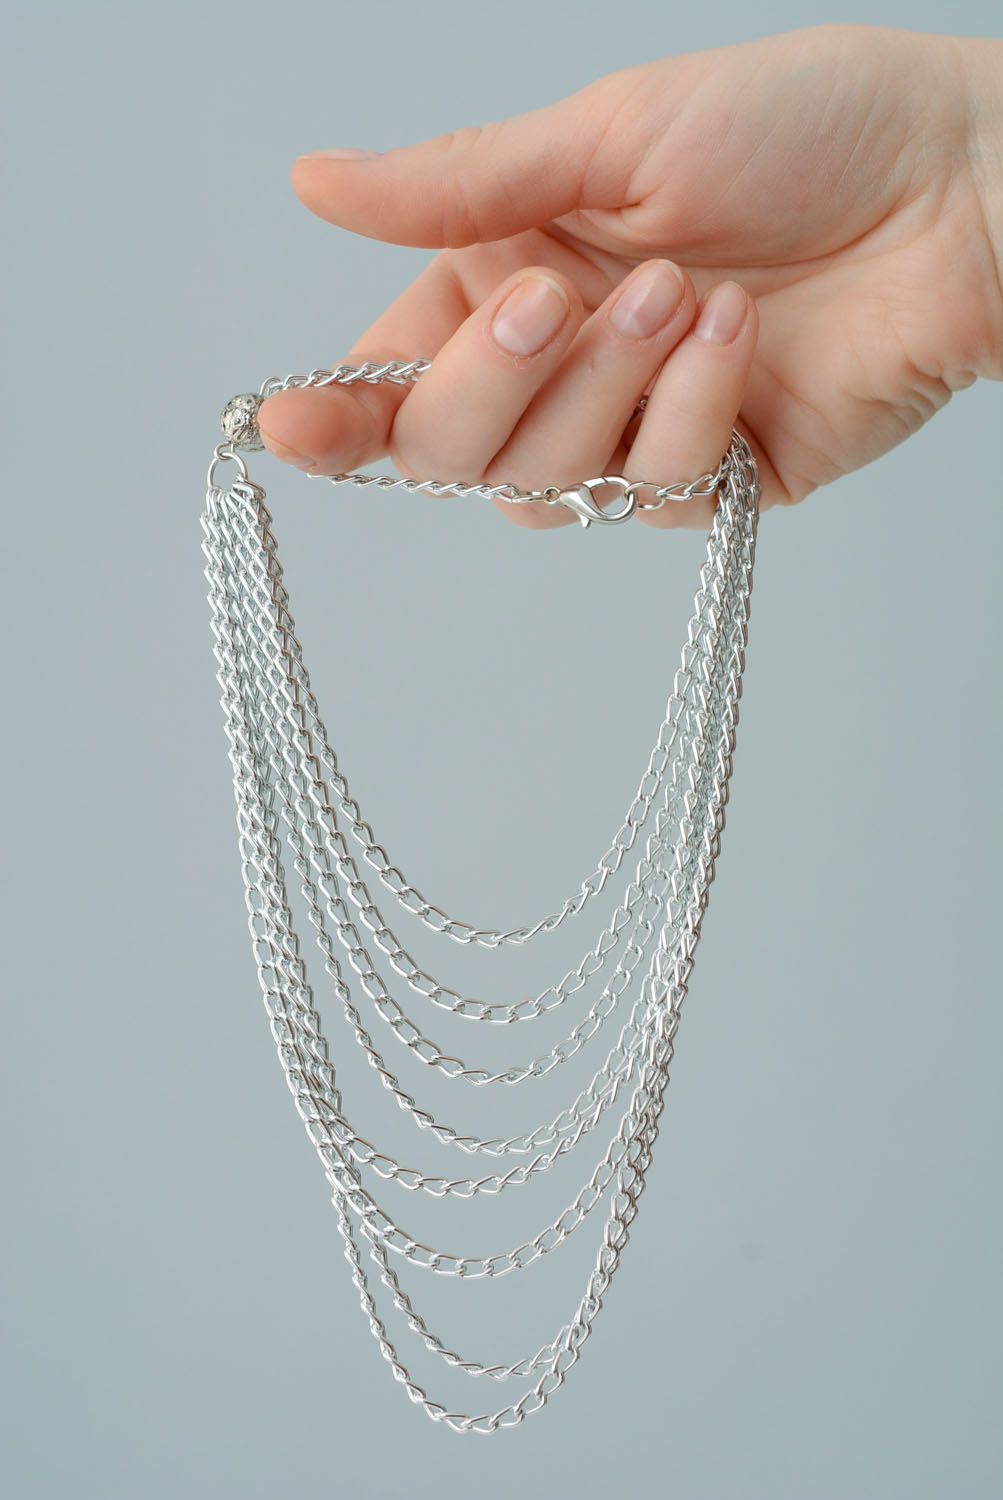 Women's necklace made of chains photo 5